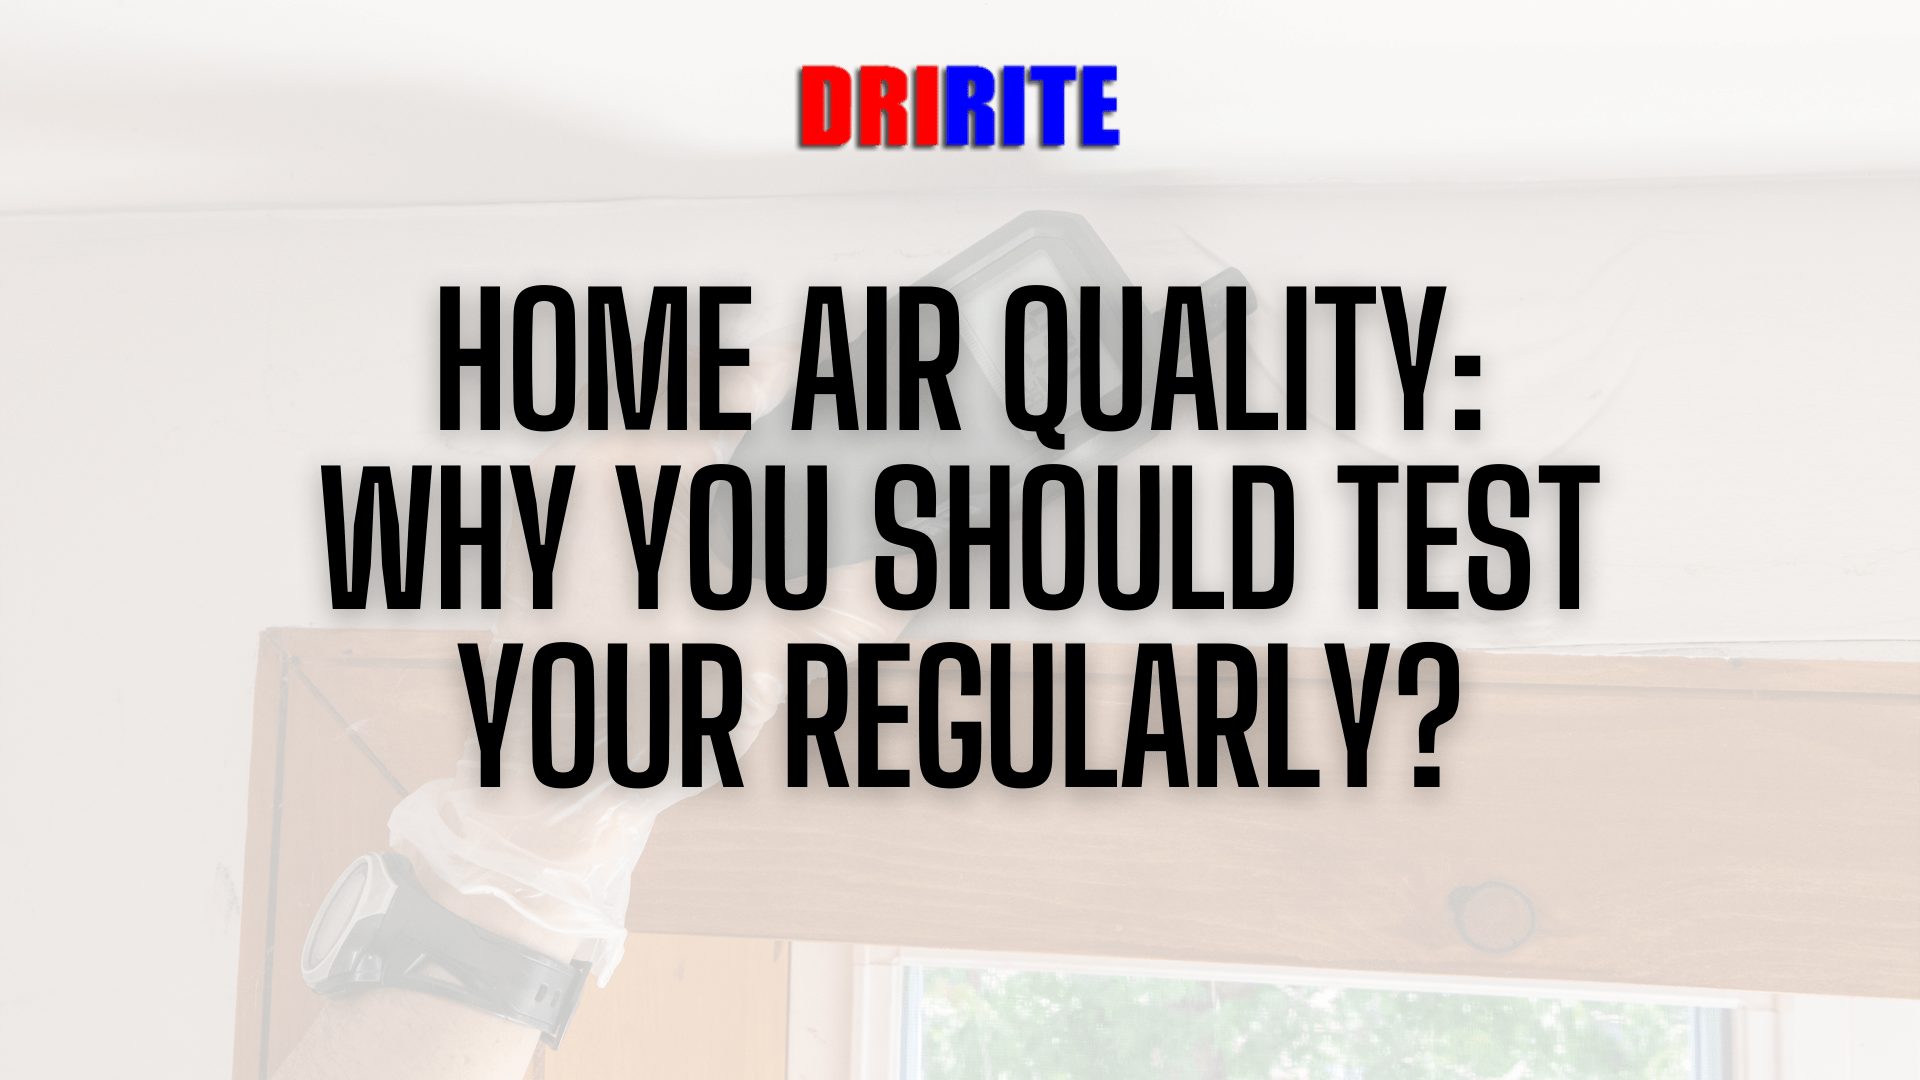 Home Air Quality - Why You Should Test Yours Regularly